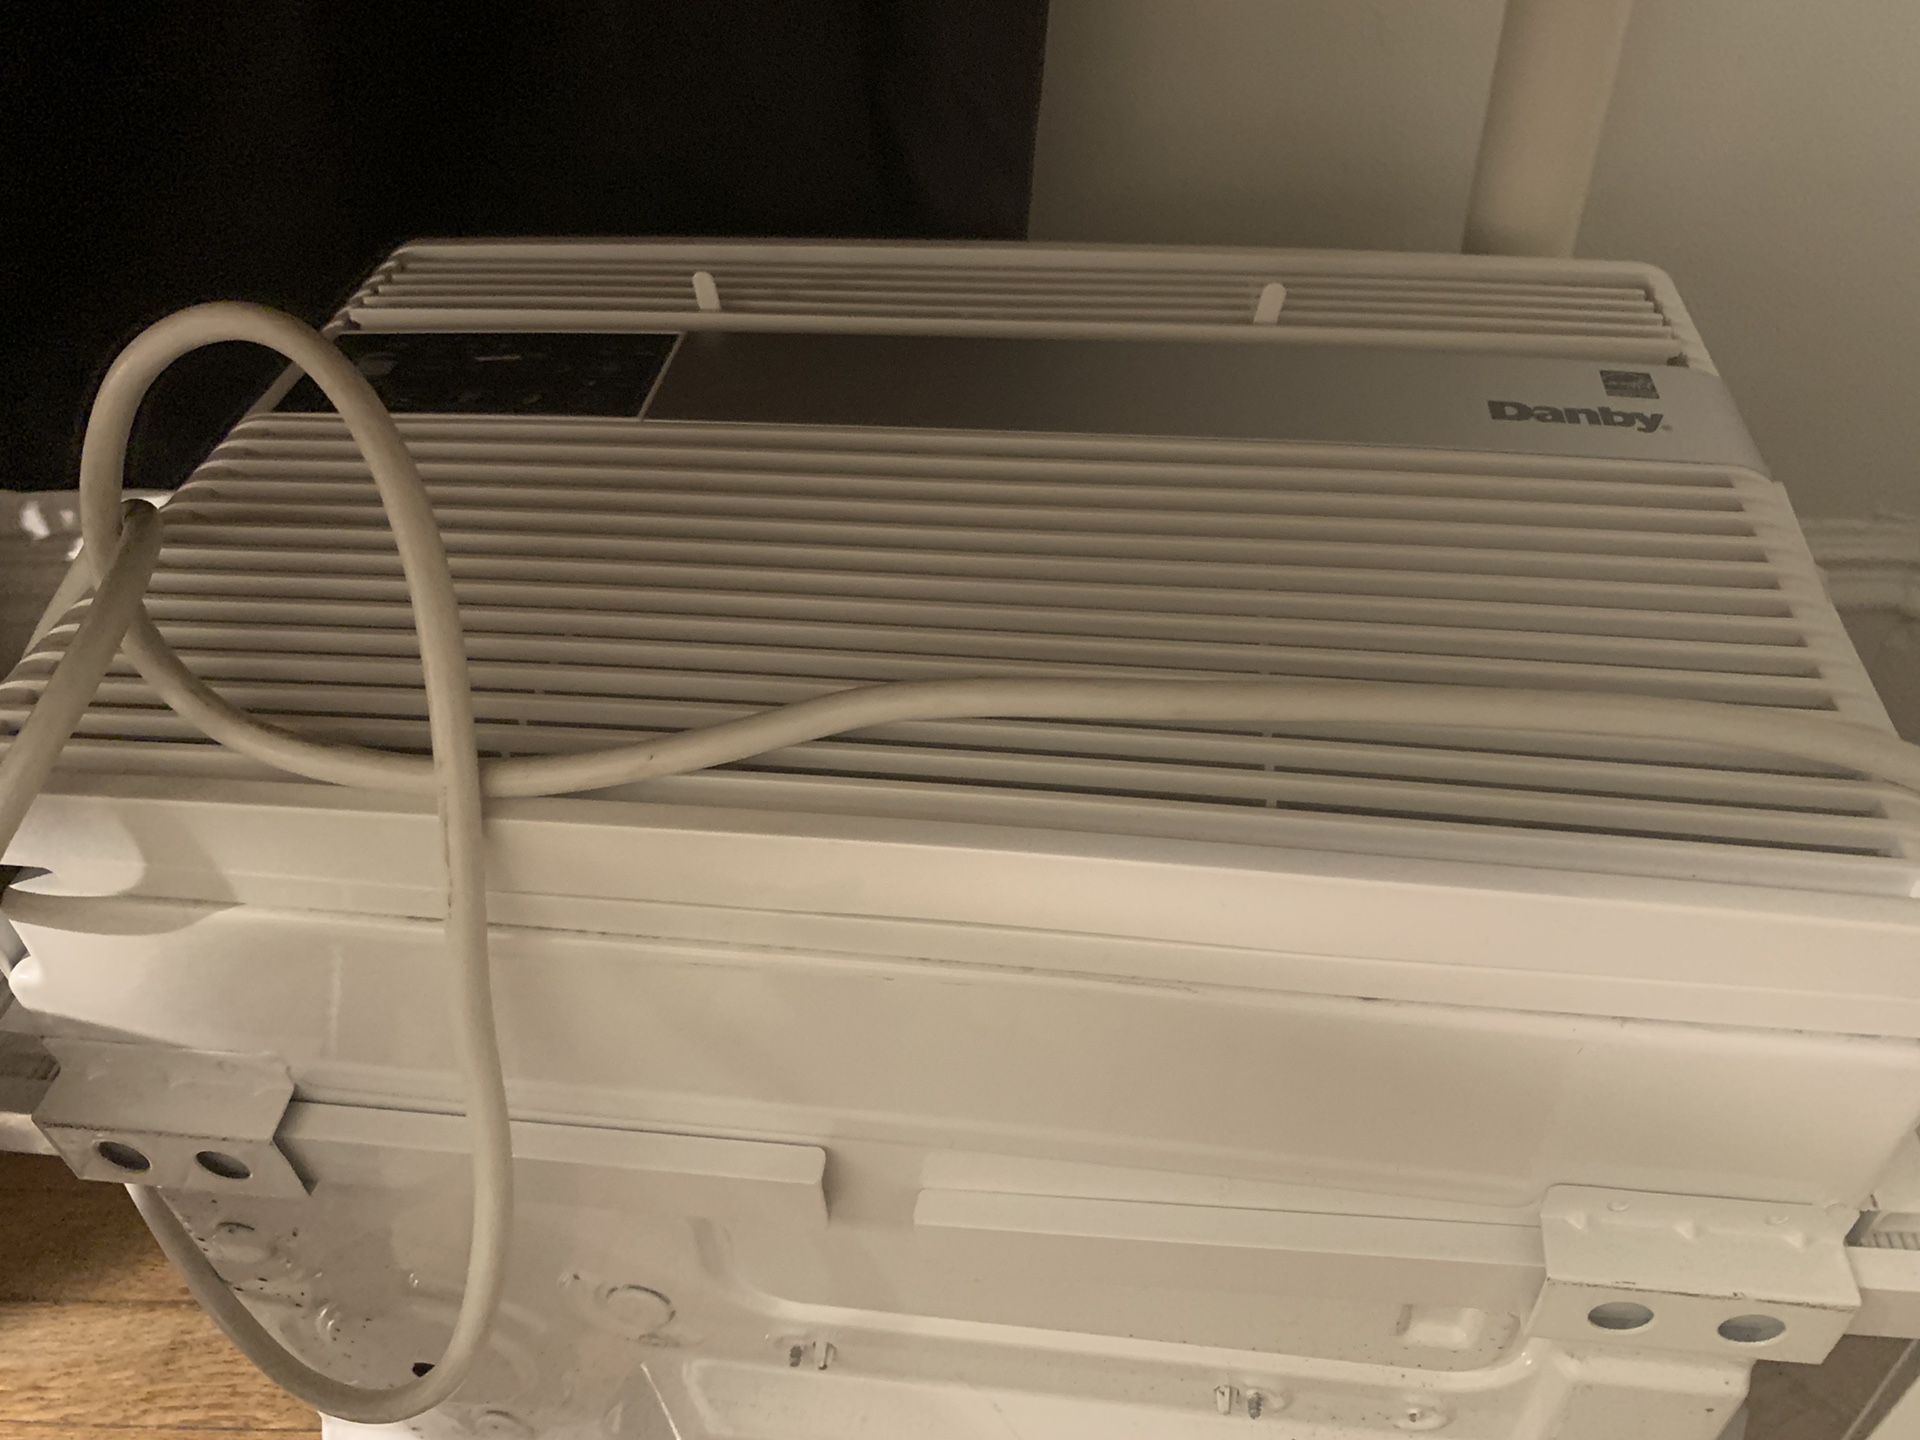 Danby big BTU air conditioner used only one season